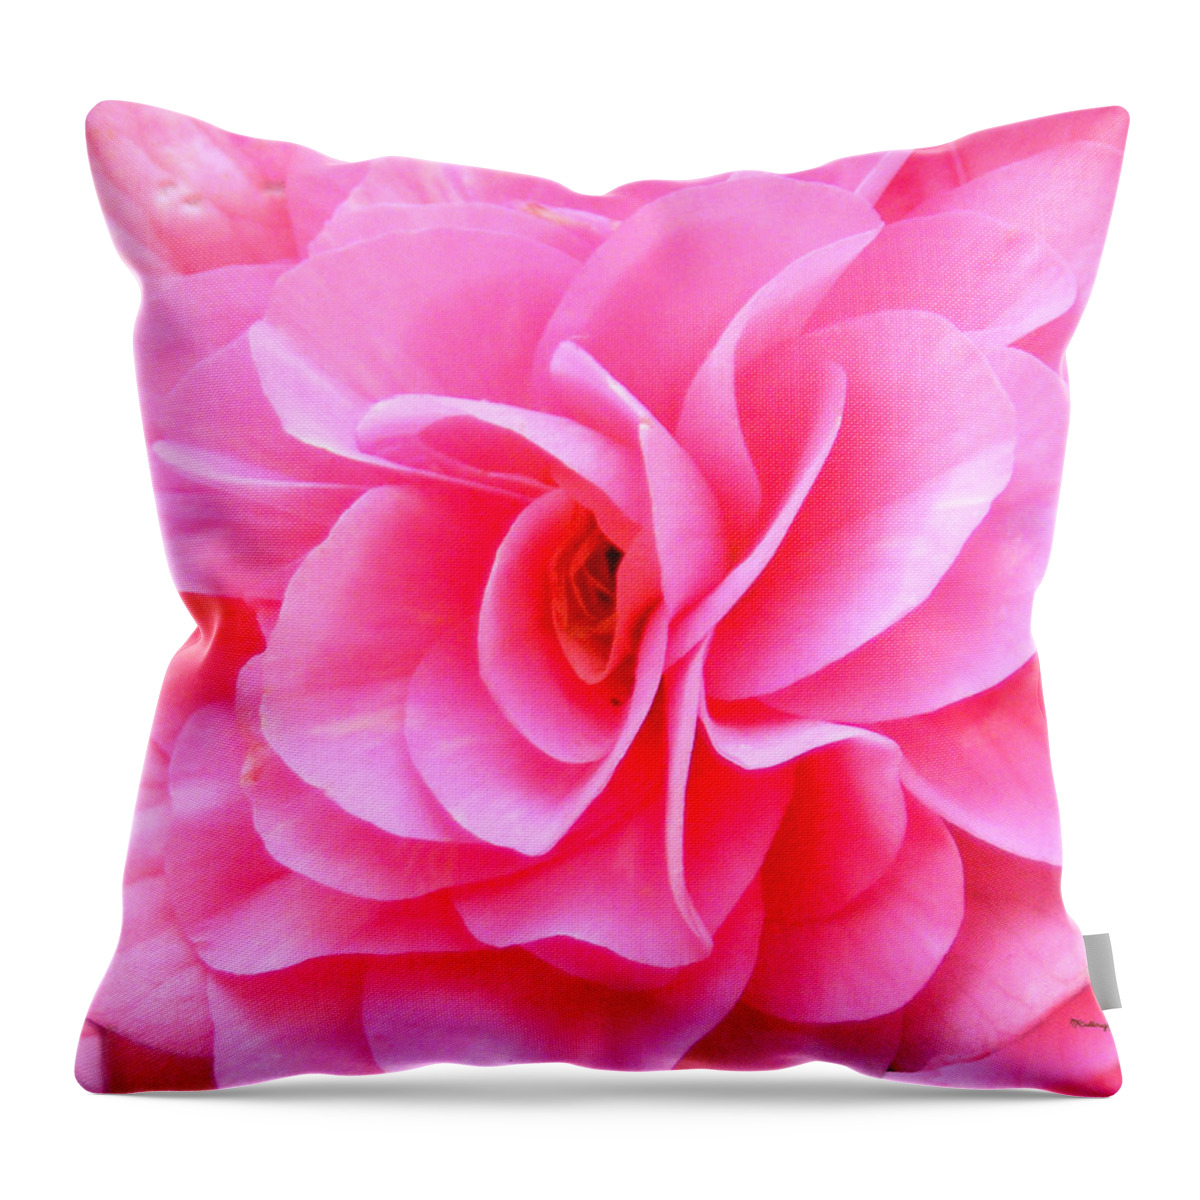 Plants Throw Pillow featuring the photograph Pretty Pink Flower Blossom Upclose by Duane McCullough